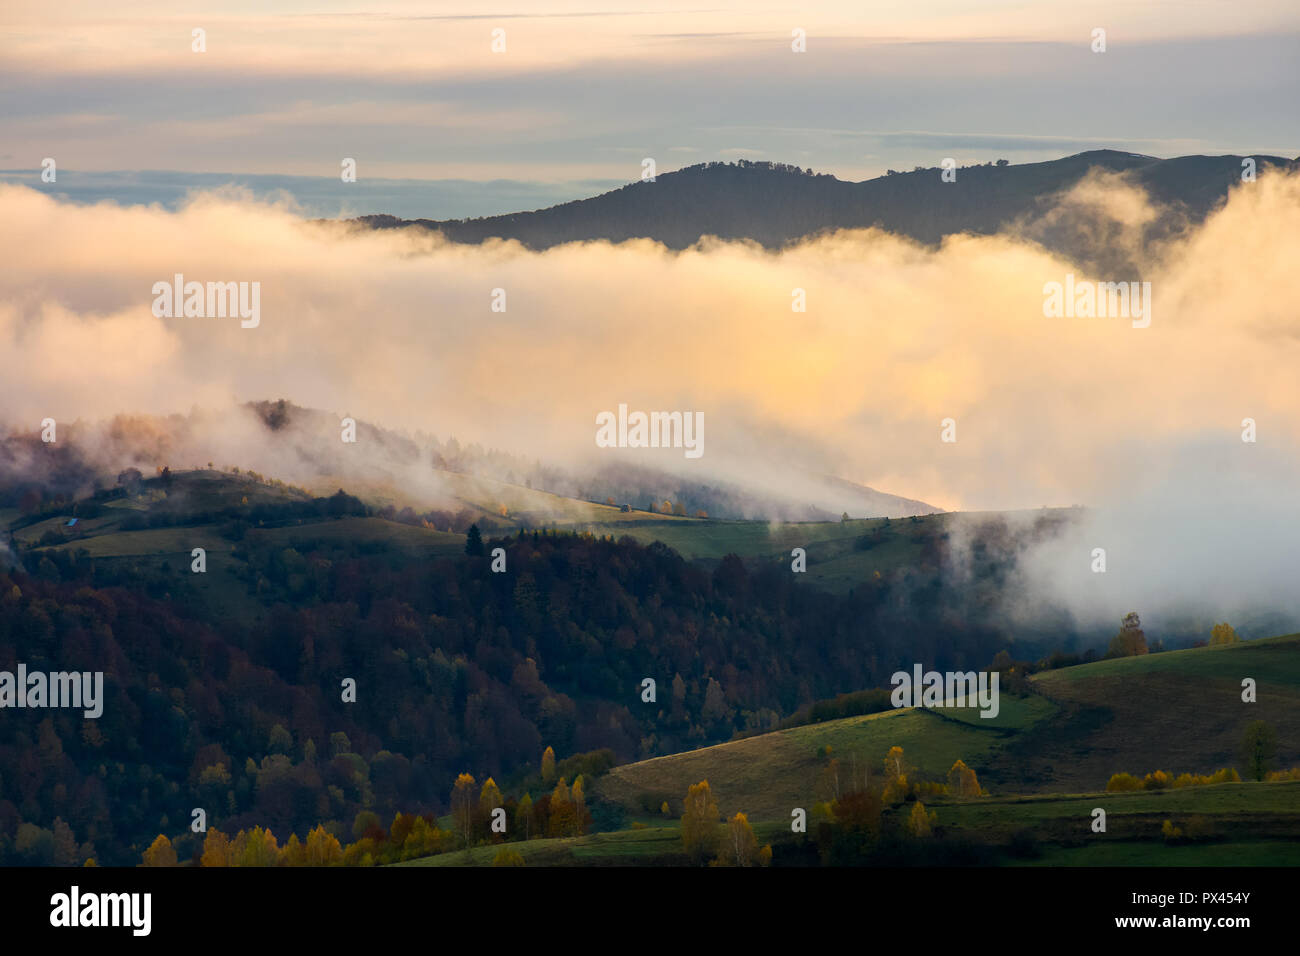 cloud inversion at dawn. lovely autumn scenery of mountainous rural area Stock Photo